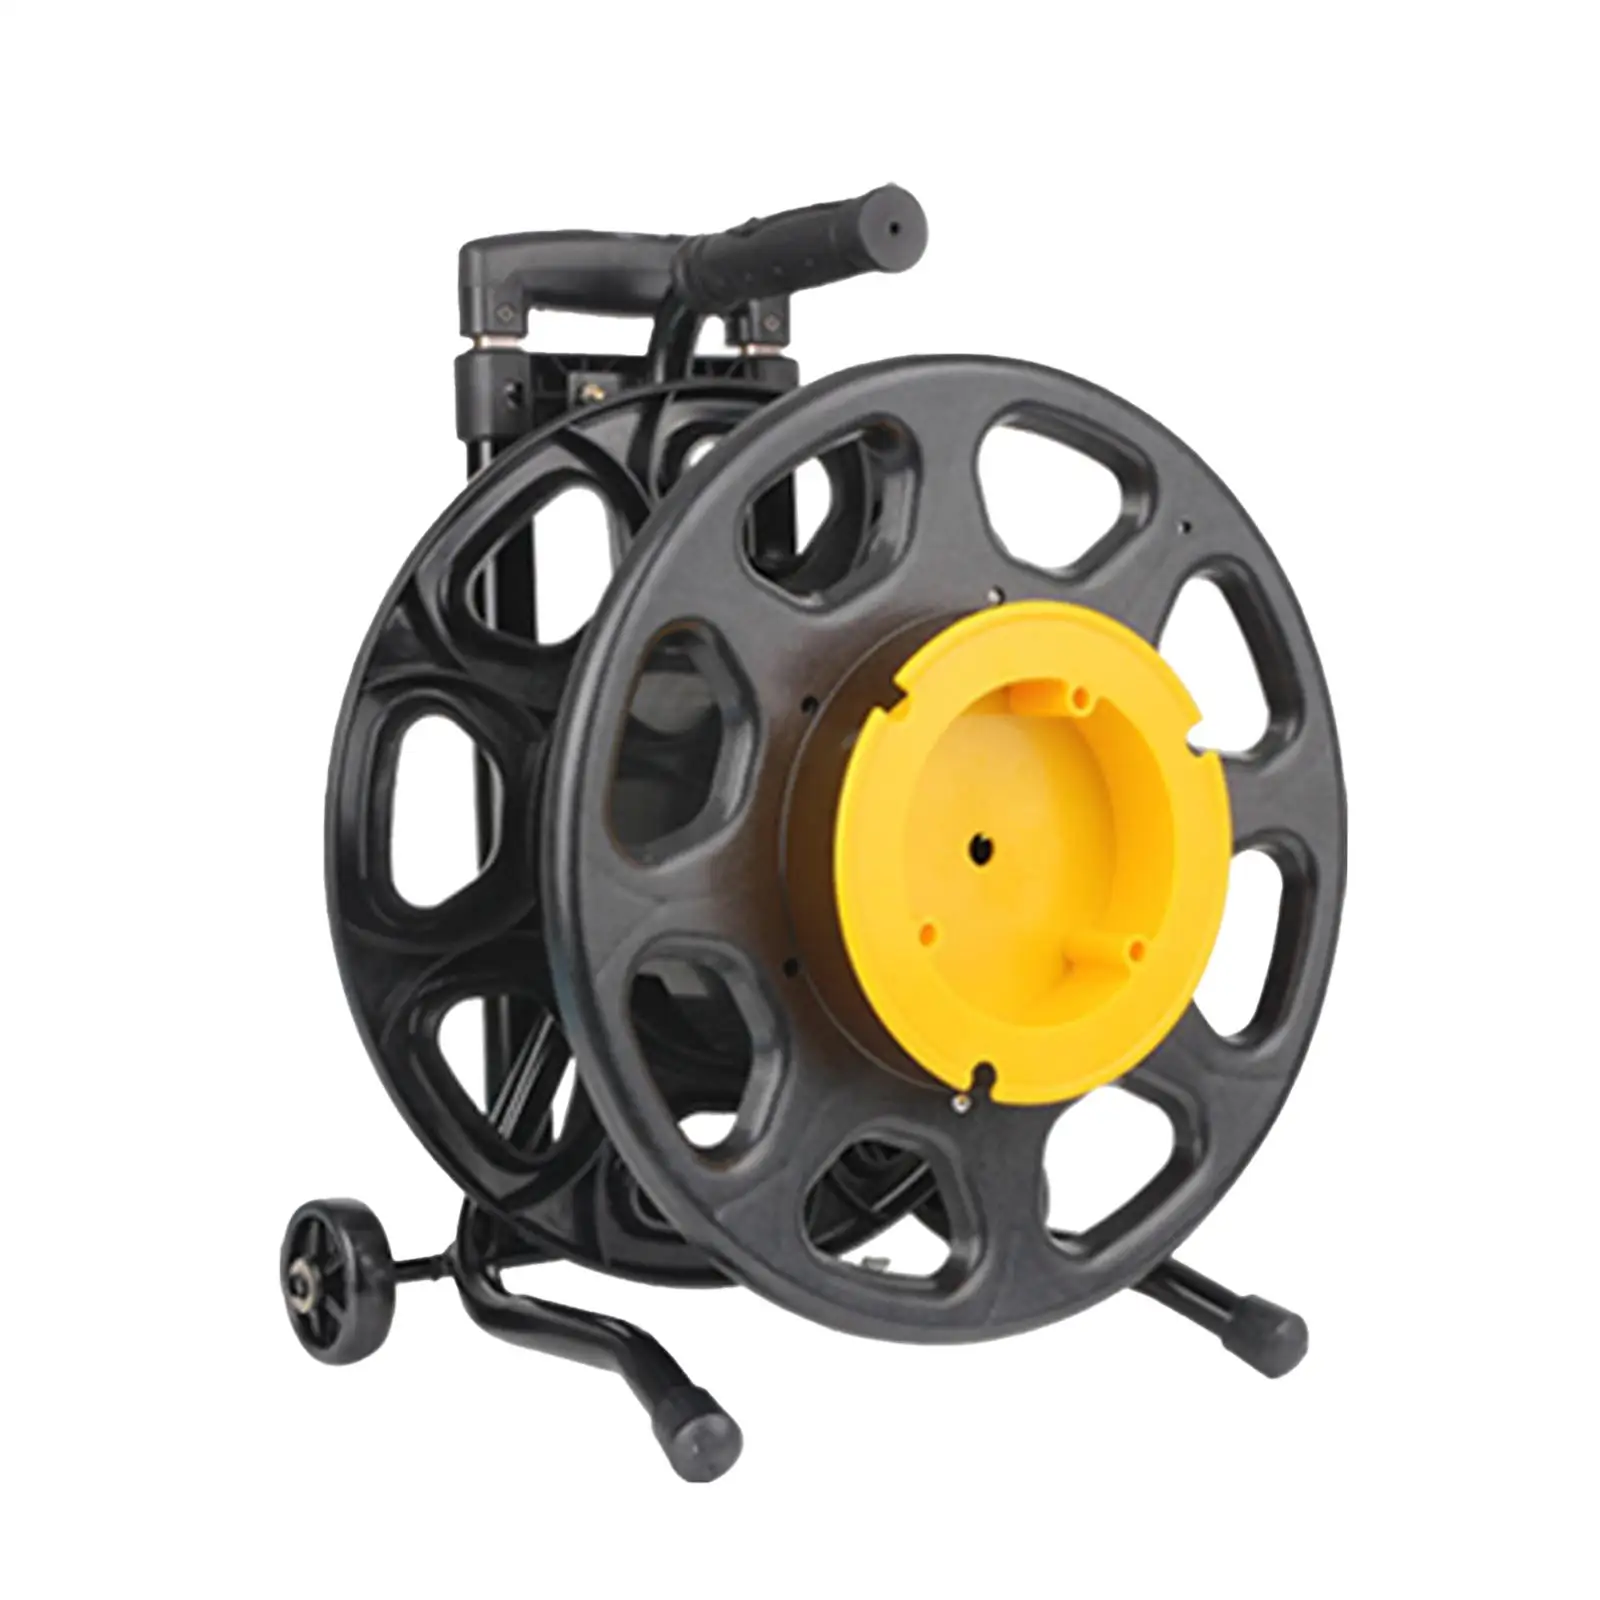 Mobile Cable Reel Extension Cord Reel Easy to Grip Optical Fiber Empty Disk for Lawnmower Cable Workshop Garden Accessories Yard